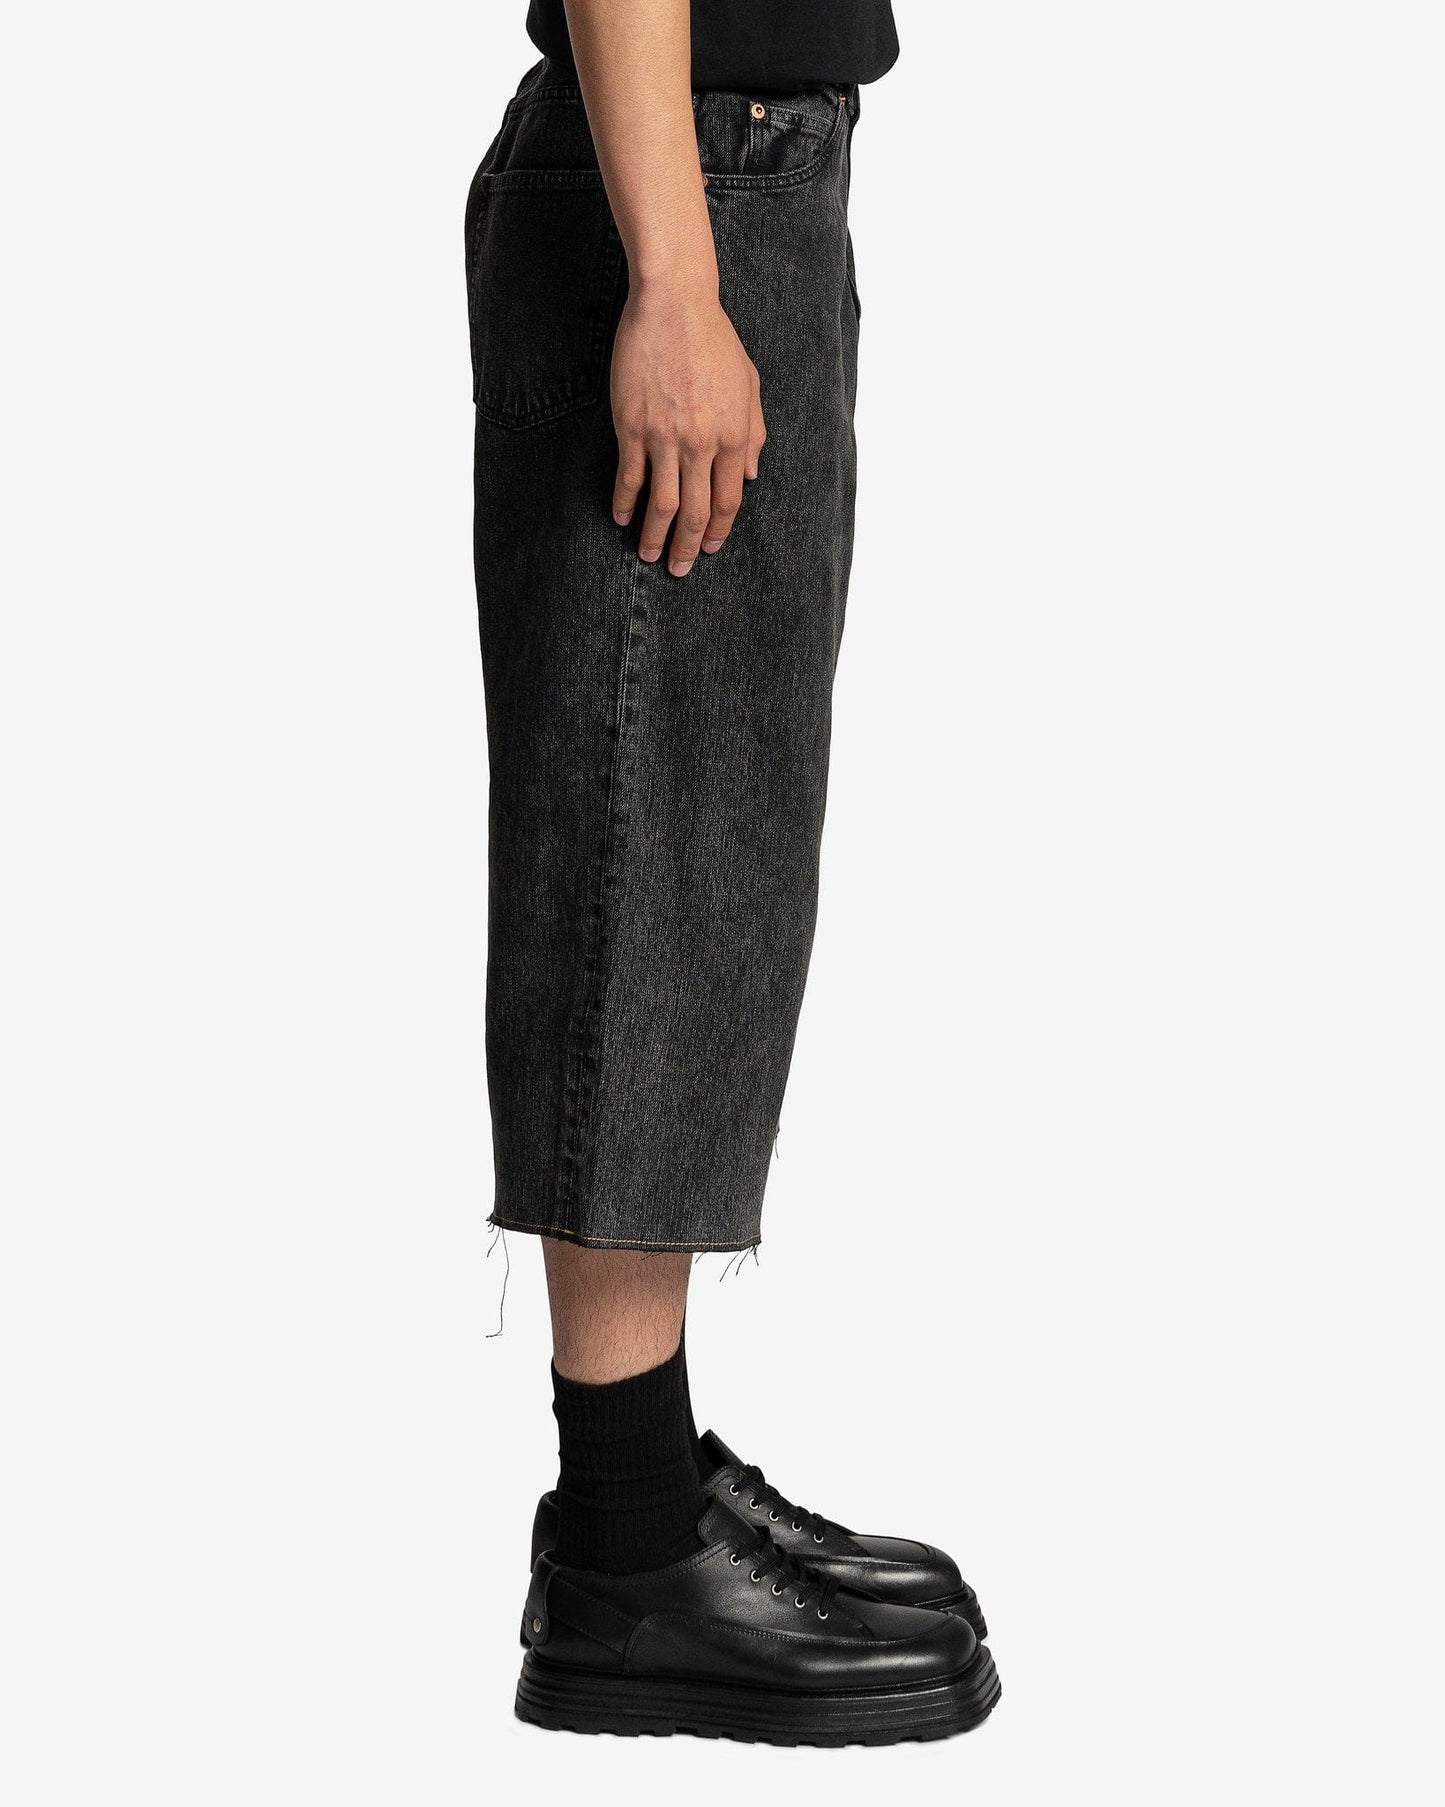 Our Legacy Men's Jeans Capri Cut in Overdyed Black Chain Twill